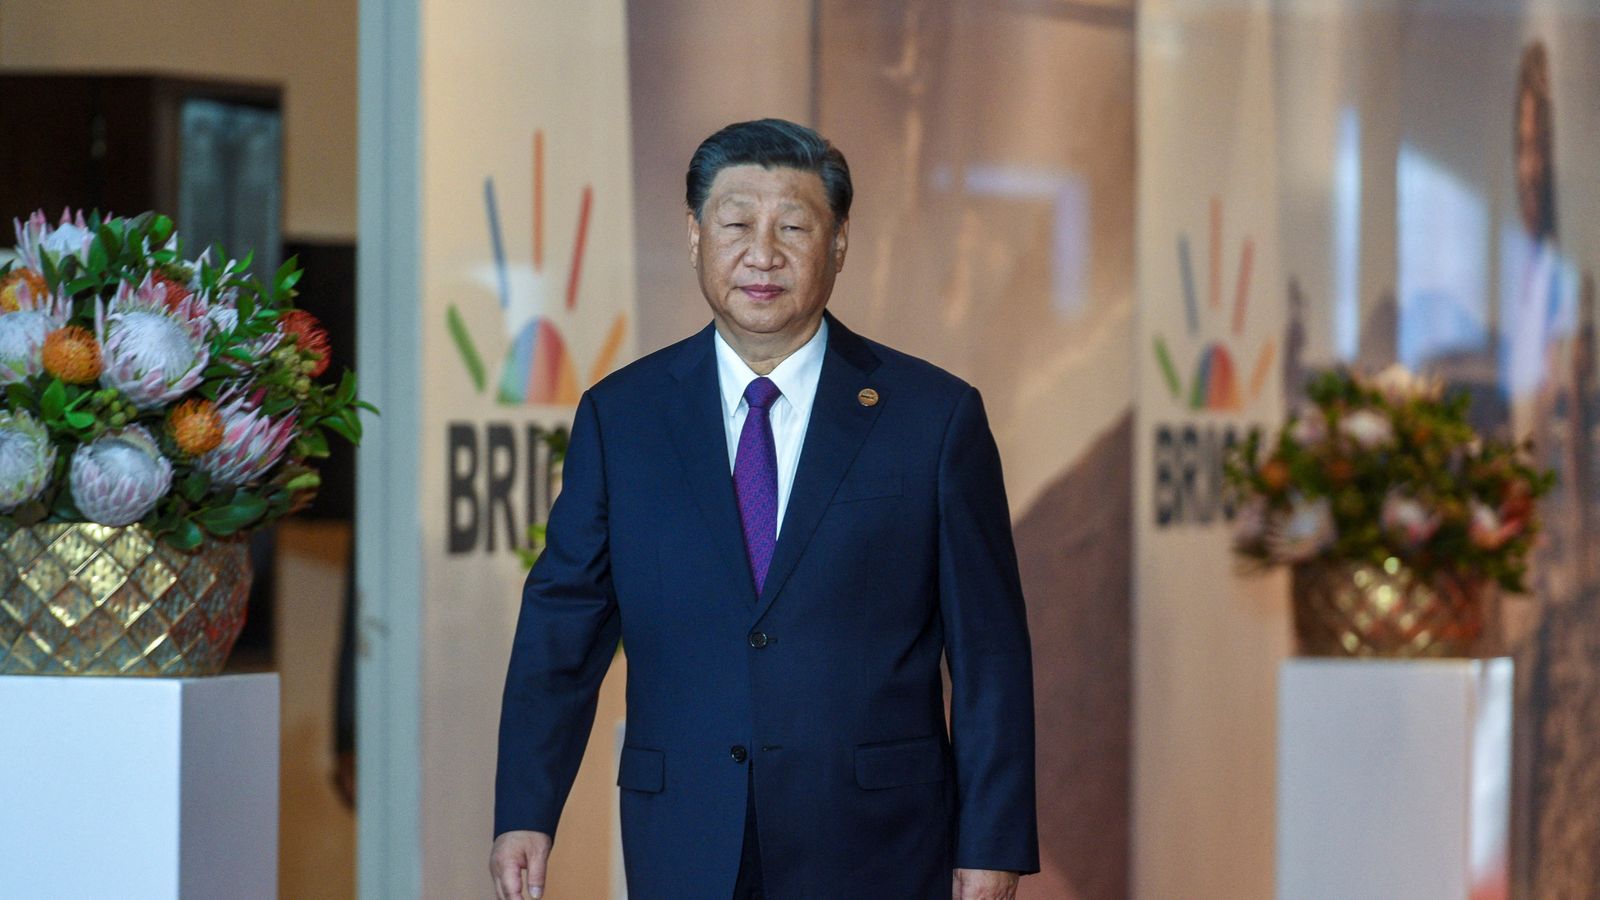 Xi Jinping unexpectedly pulls out of BRICS summit speech in 'extraordinary' move